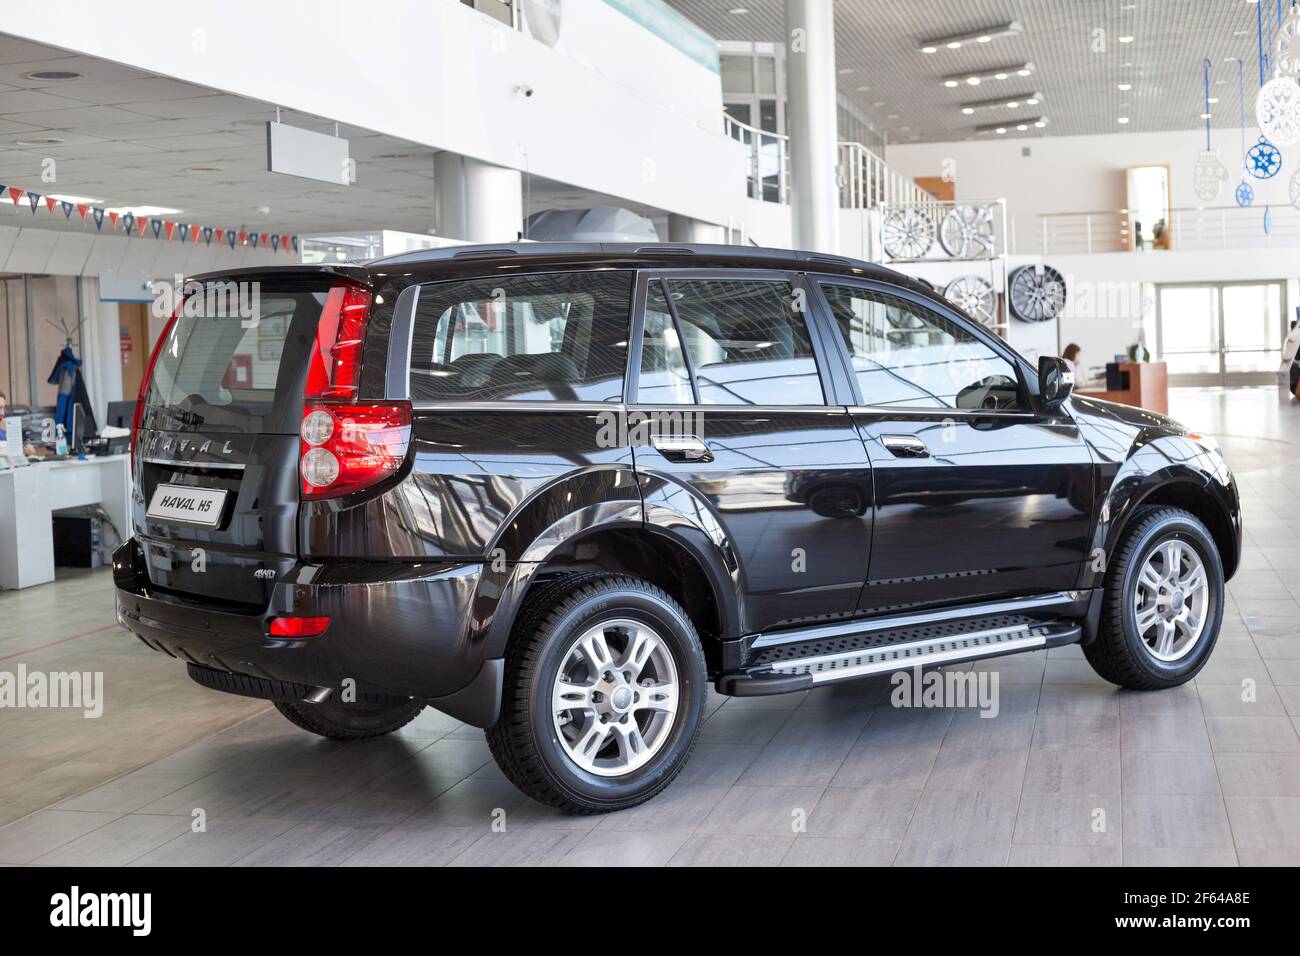 Russia, Izhevsk - February 17, 2021: Haval showroom. New modern Haval H5 car in dealer showroom. Back and side view. Car manufacturer from China. Stock Photo